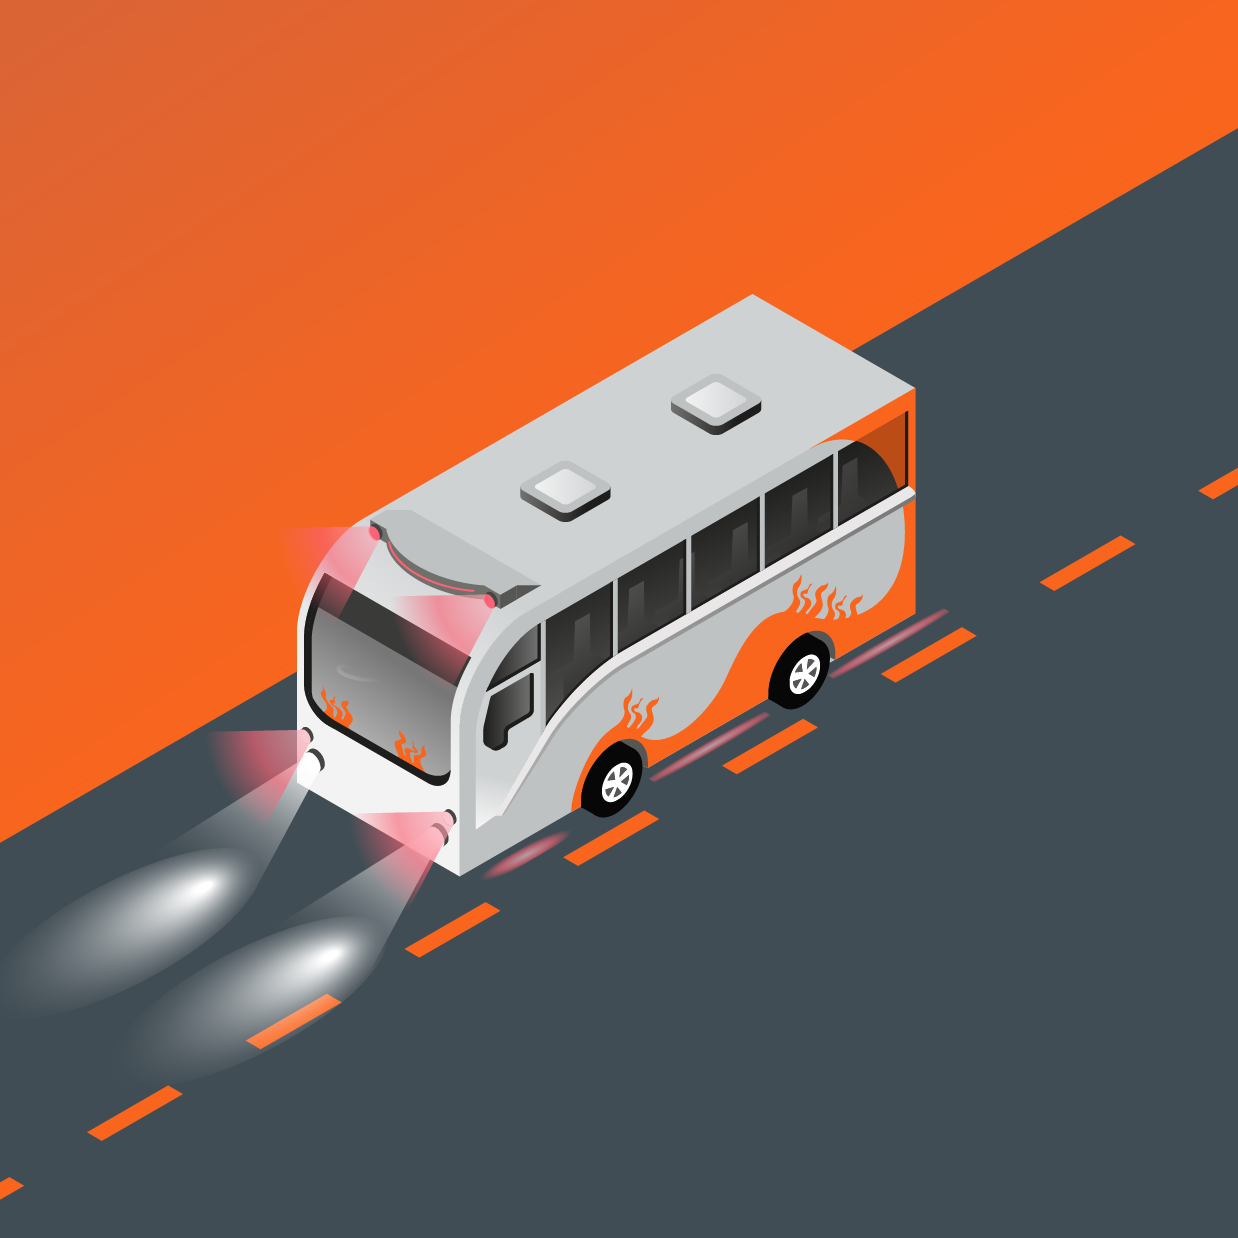 An illustration of a colourful bus with flame details on the sides, driving on a road with orange markings